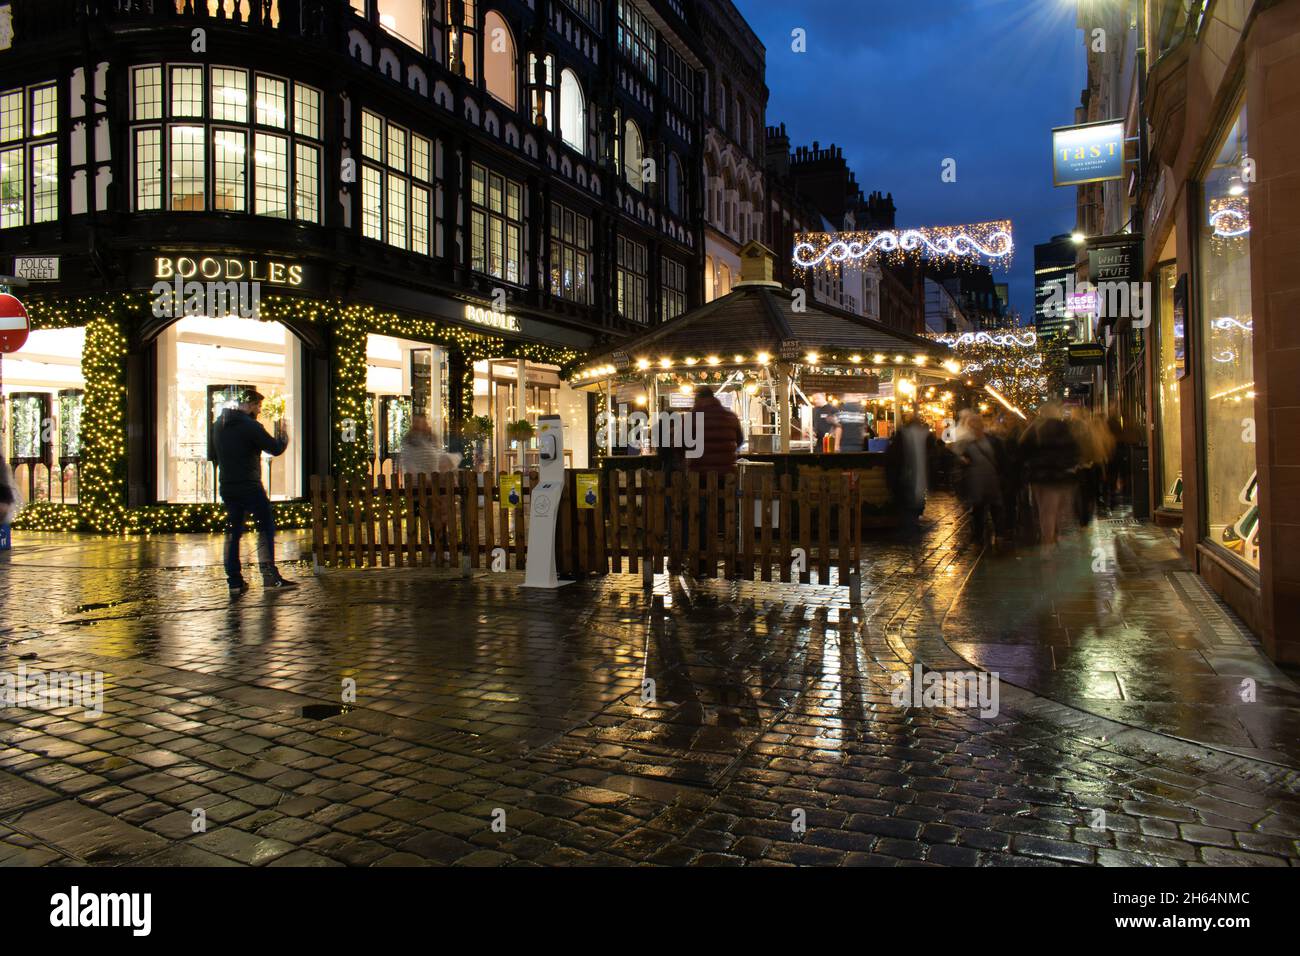 Christmas Market on King Street in front of Boodles store. Opening night. Long exposure. Manchester UK Stock Photo